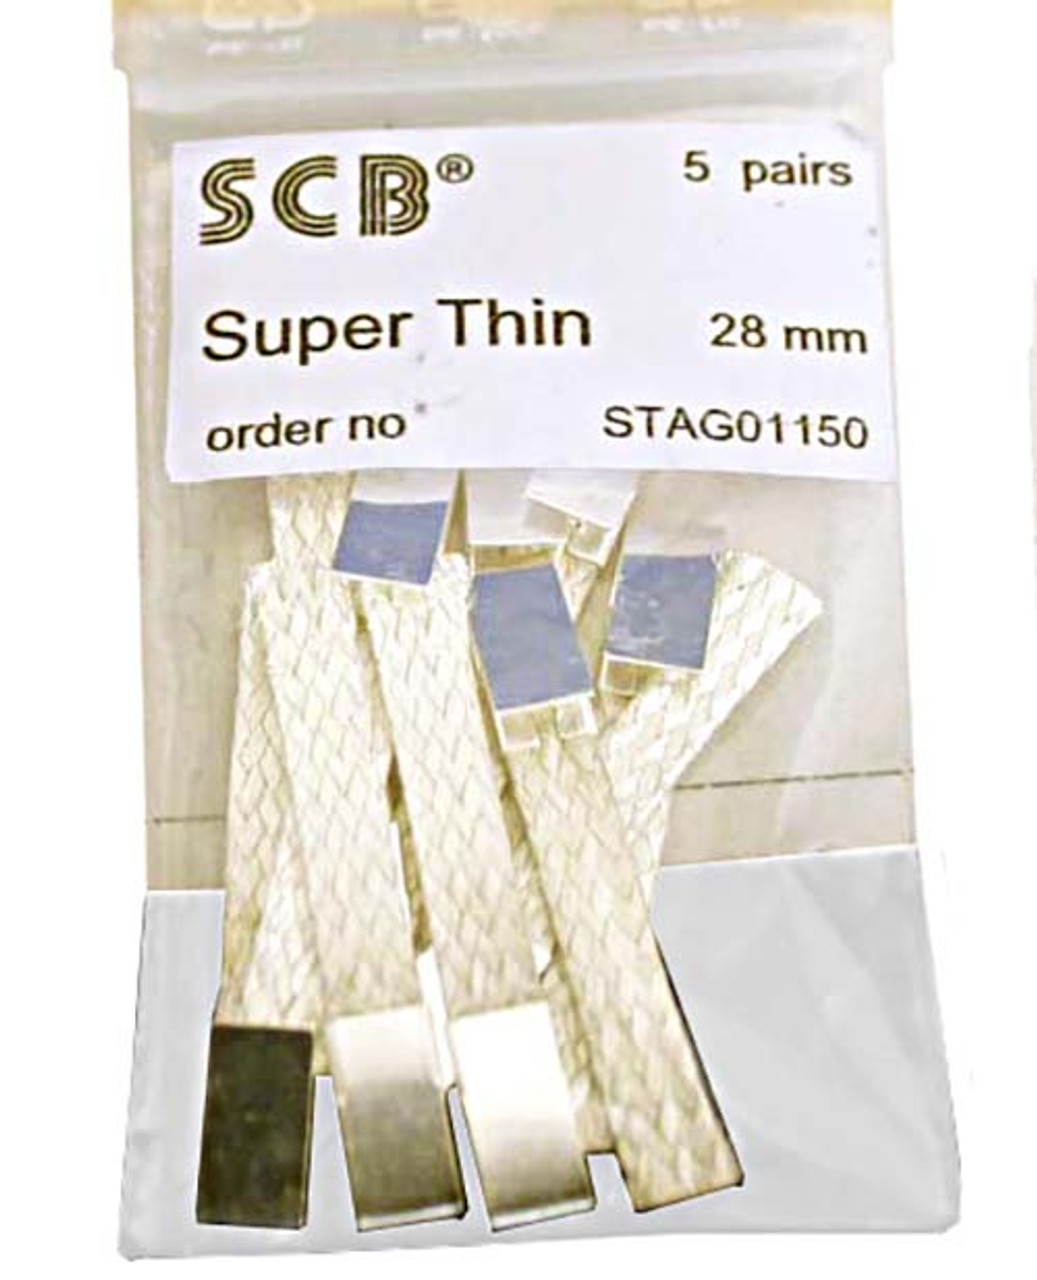 SCB Standard Silver Plated  Braid - 5 pr pack - STAG01200